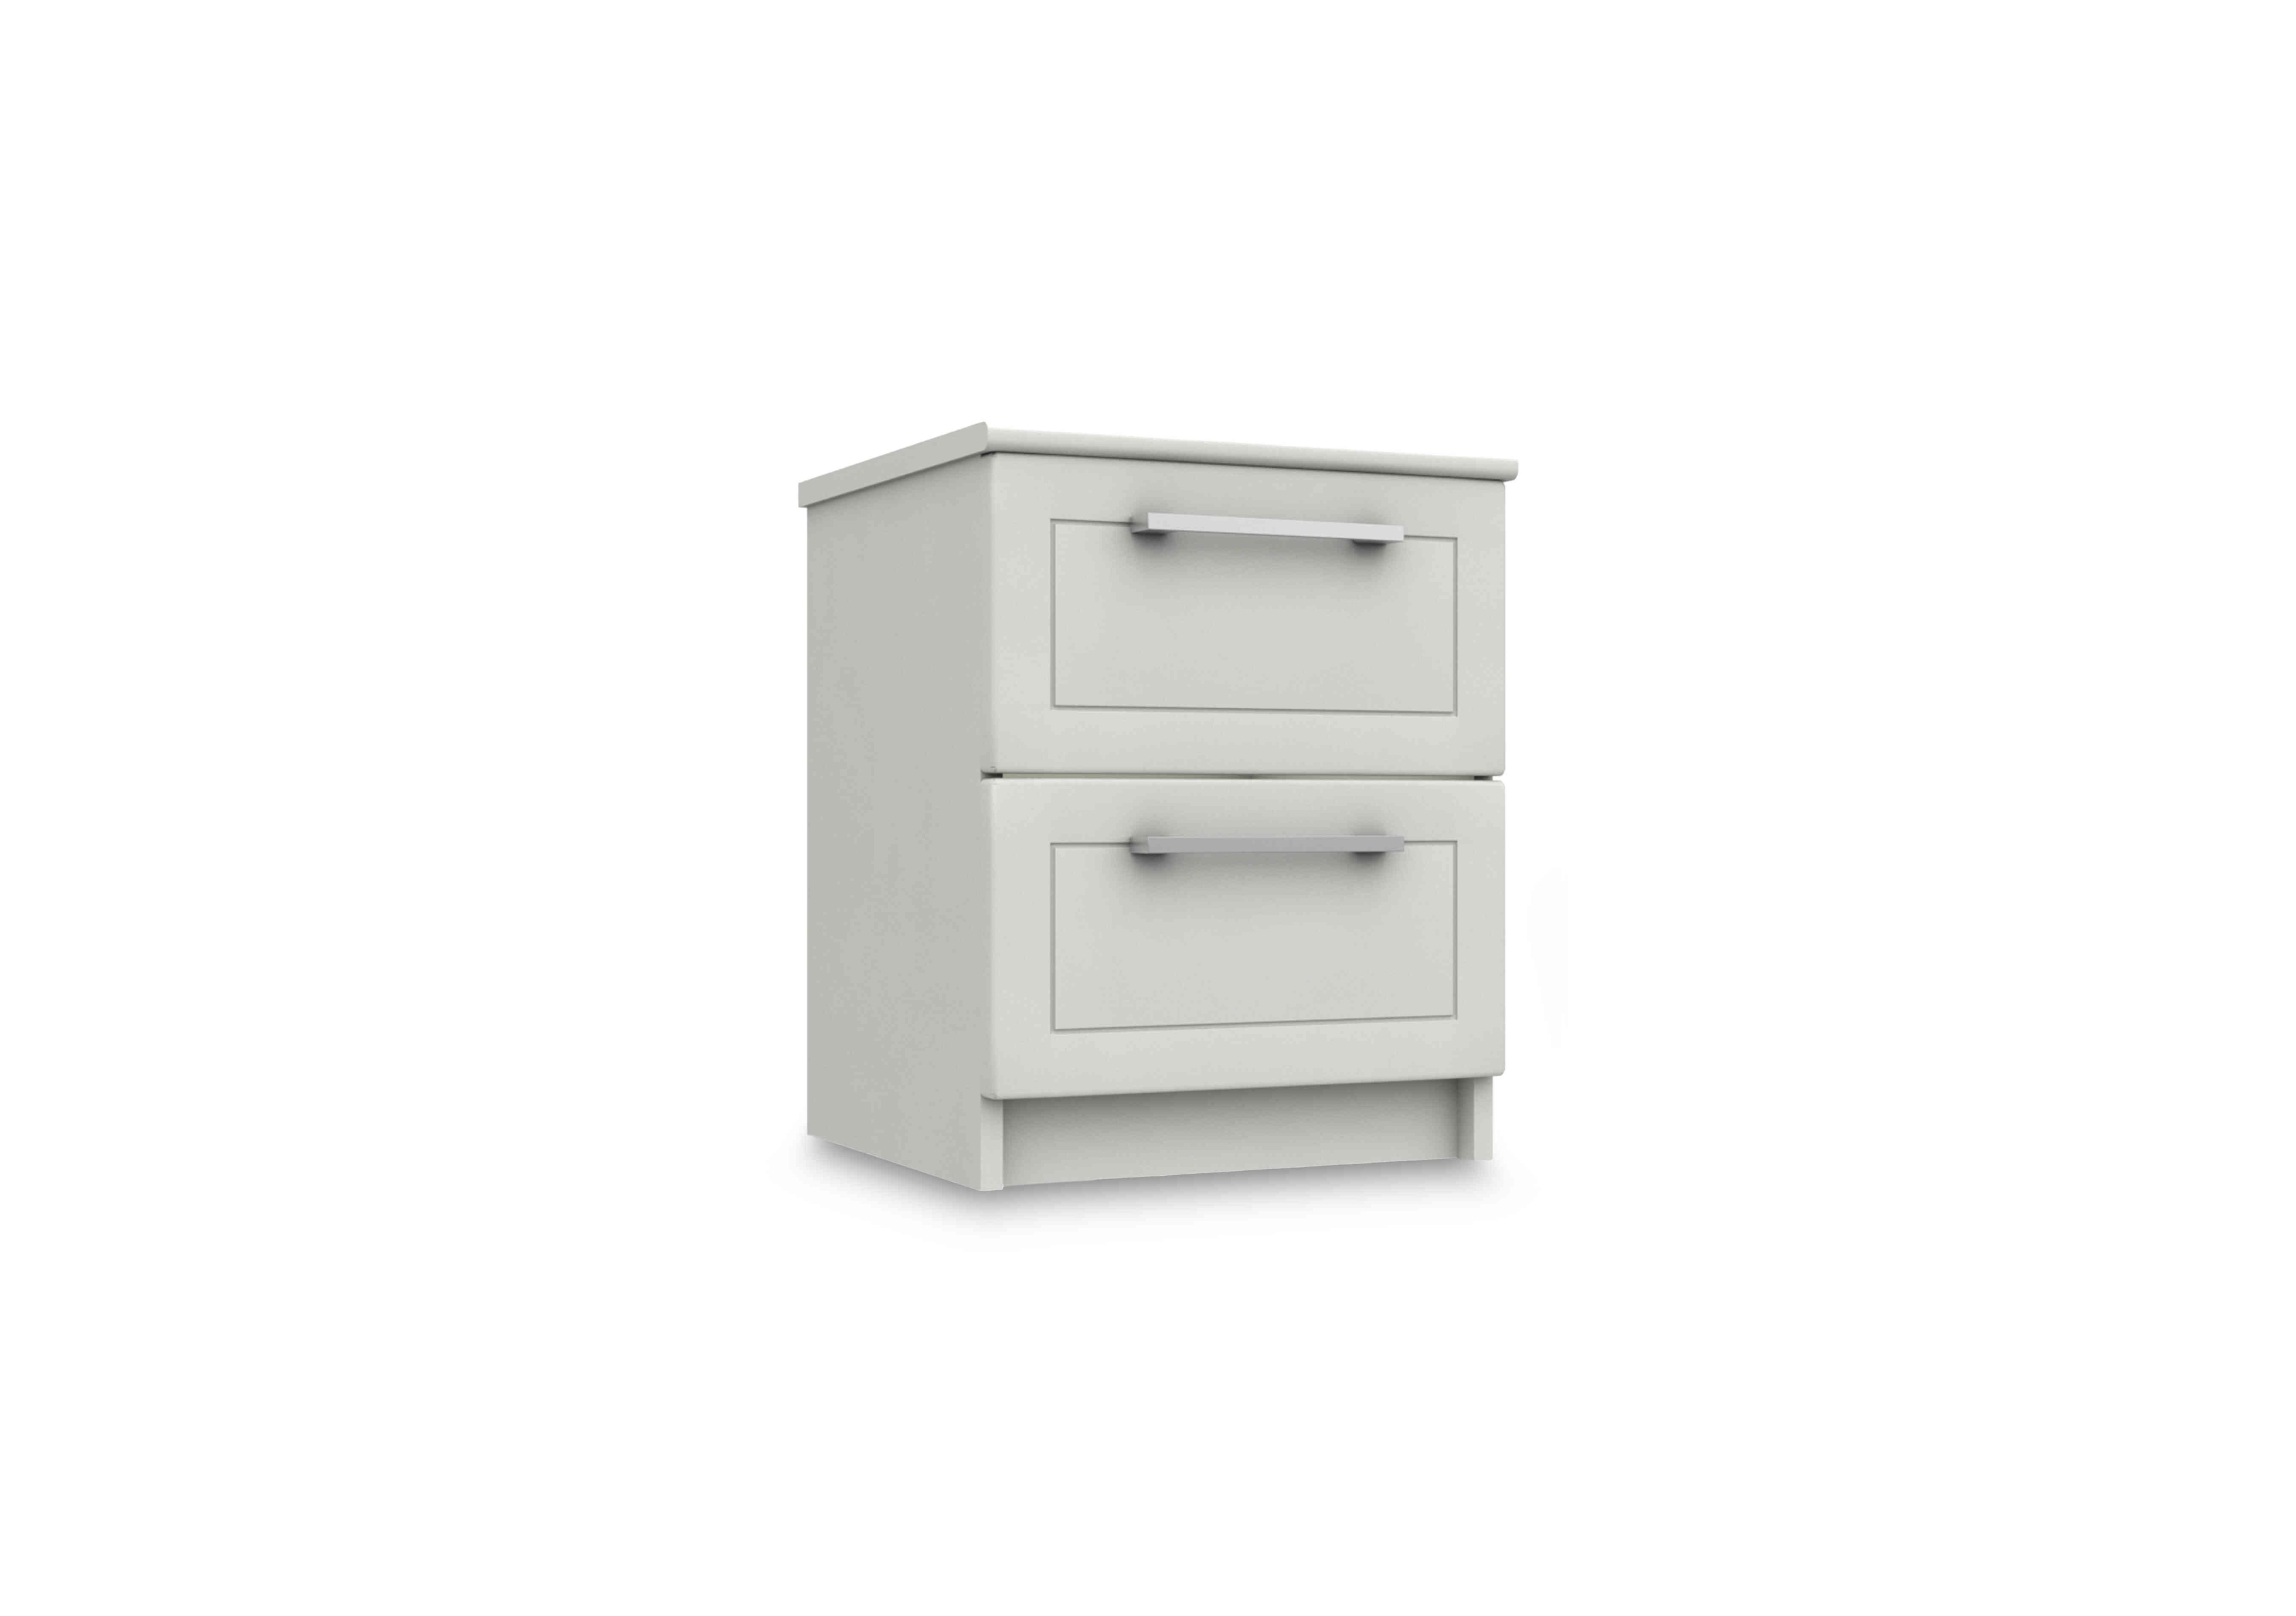 Bexley 2 Drawer Bedside Cabinet in White Gloss on Furniture Village